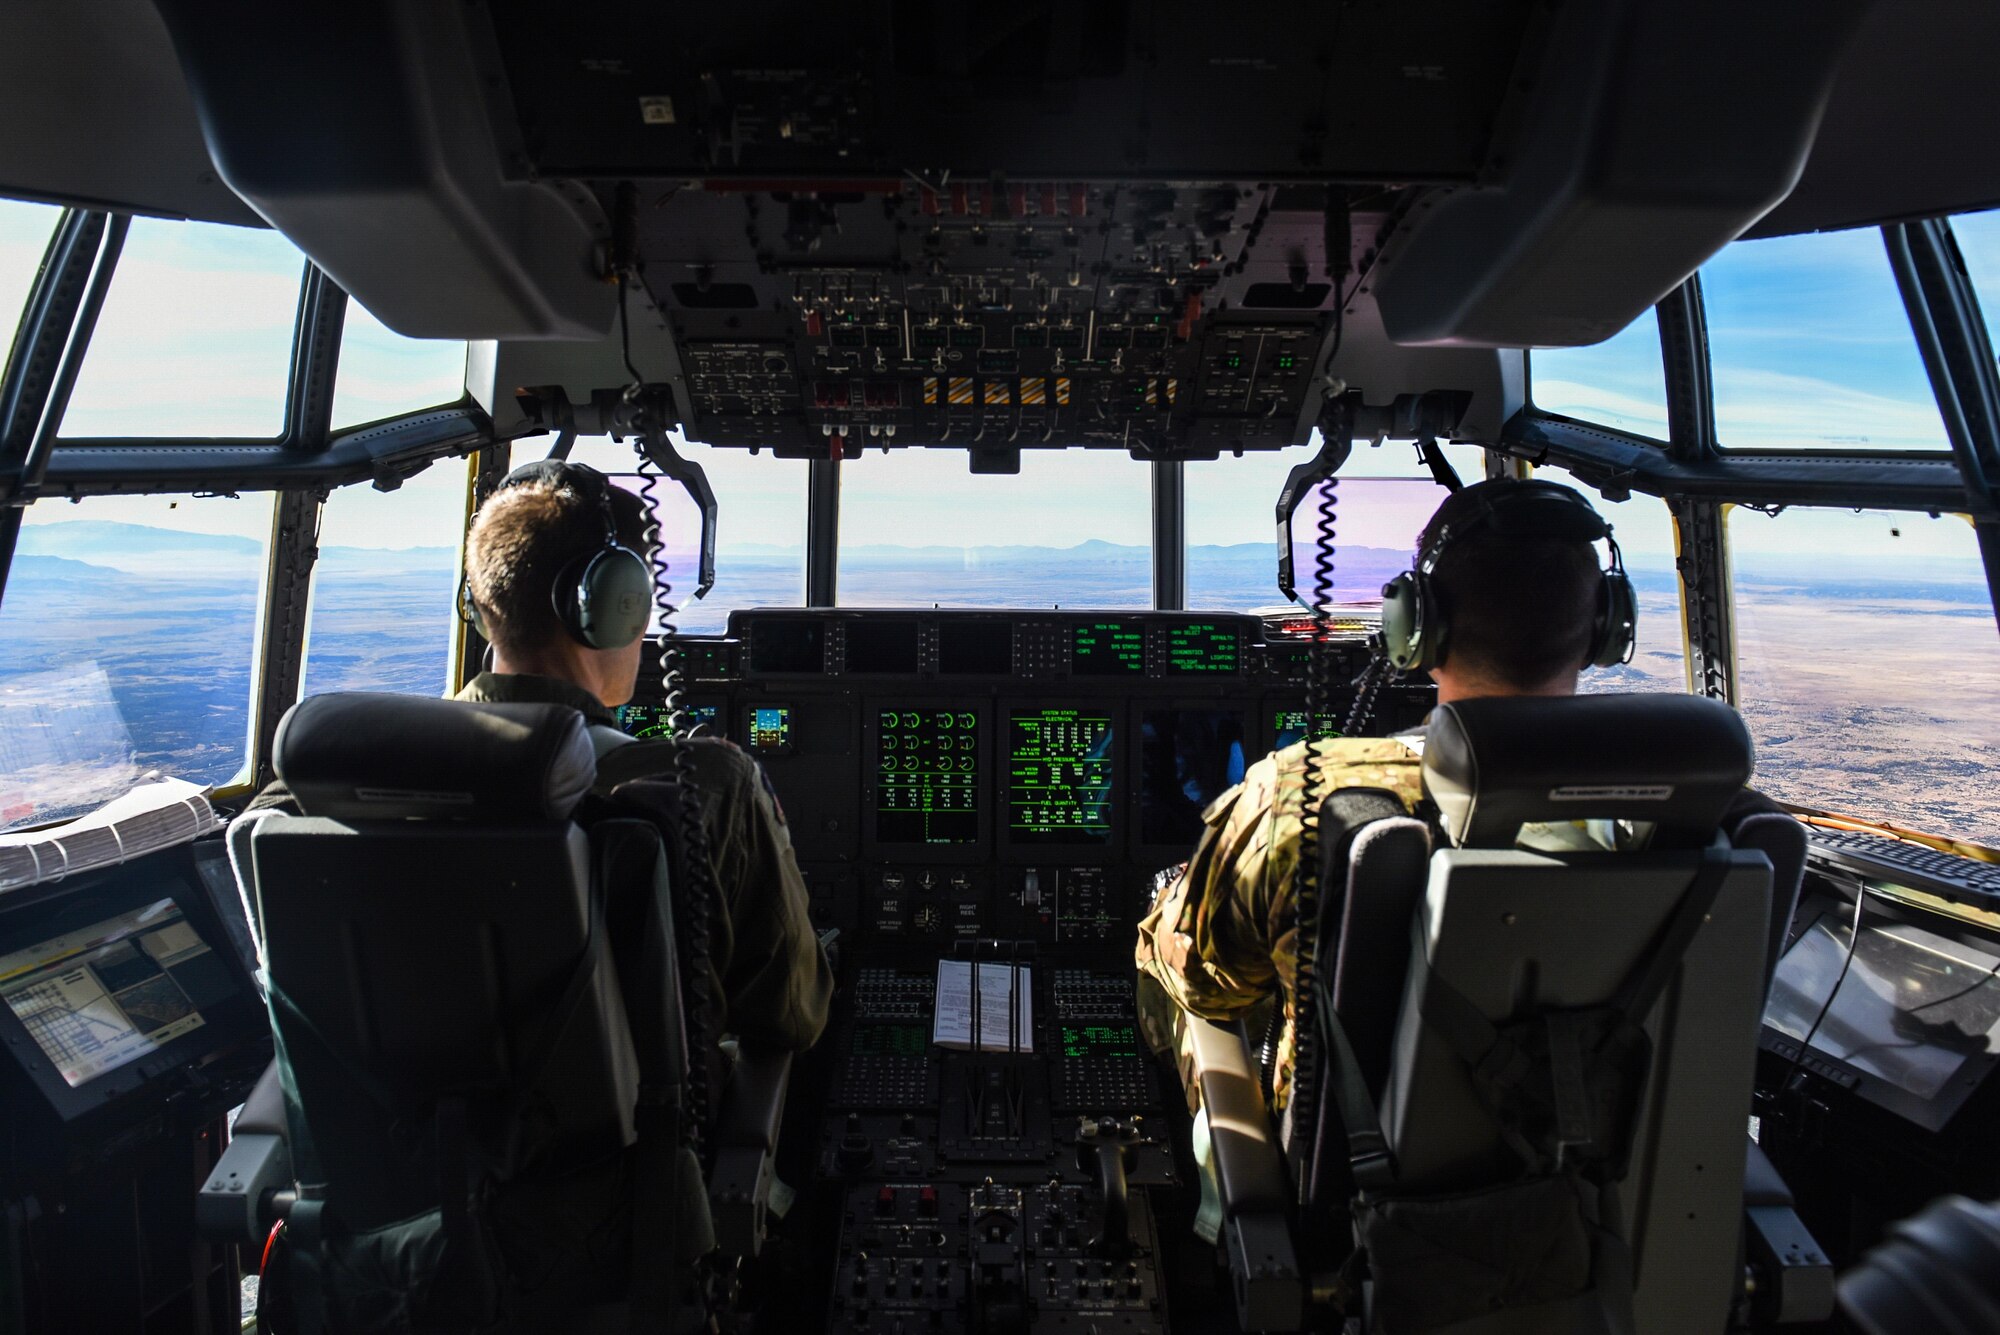 Maj. Brian Pesta, left, and Maj. Justin Eulberg, pilots with the 1st Special Operations Group, Detachment 2, fly the AC-130J Ghostrider over White Sands Missile Range, N.M., Dec. 13, 2016. The 1st SOG, Det 2, went to Cannon AFB, N.M. to continue operational testing of Laser Small Diameter Bomb drops. (U.S. Air Force photo by Senior Airman Jeff Parkinson)